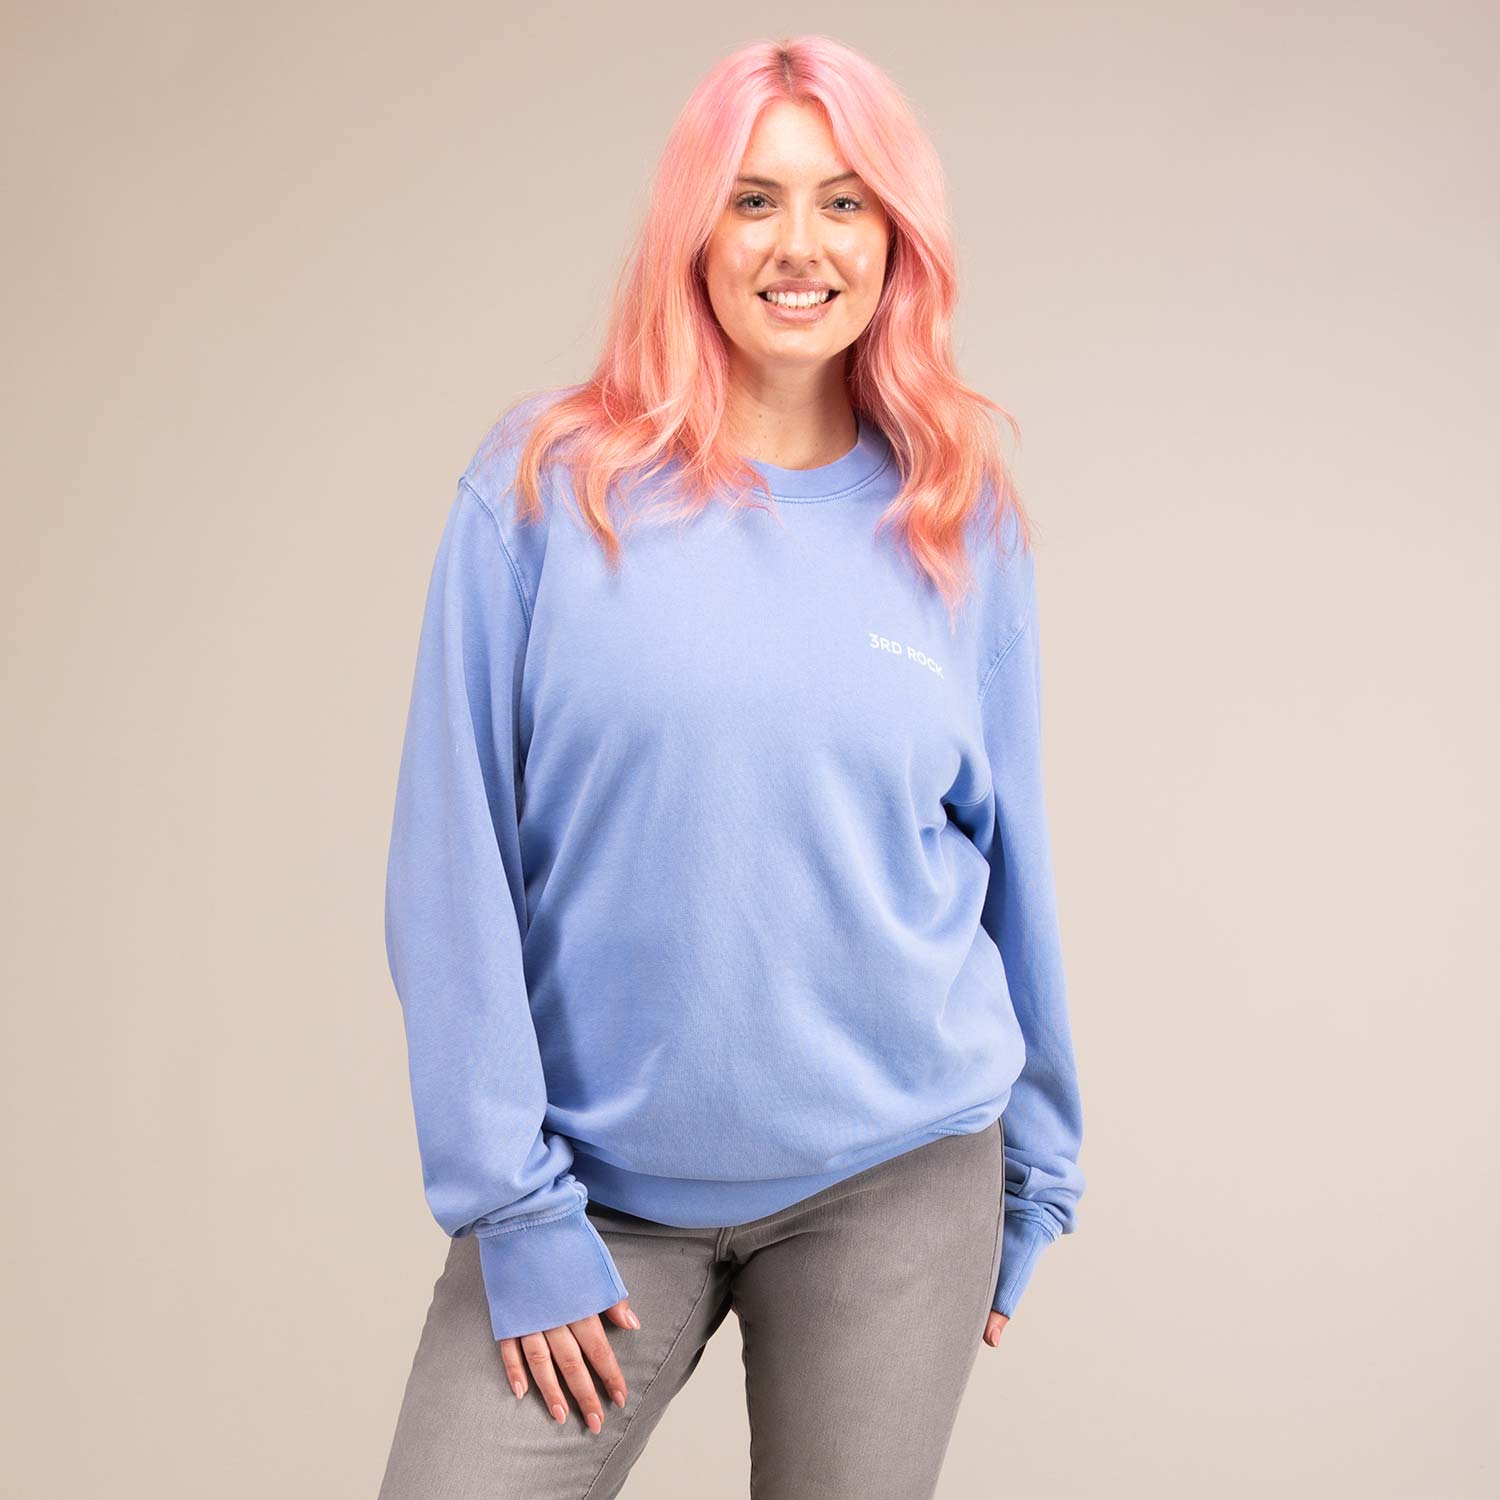 BELLAMY SWEATSHIRT |  Organic Cotton Sweatshirt | 3RD ROCK Clothing -  Sophie is 5ft 9 with a 40.5" bust and wears a size L F